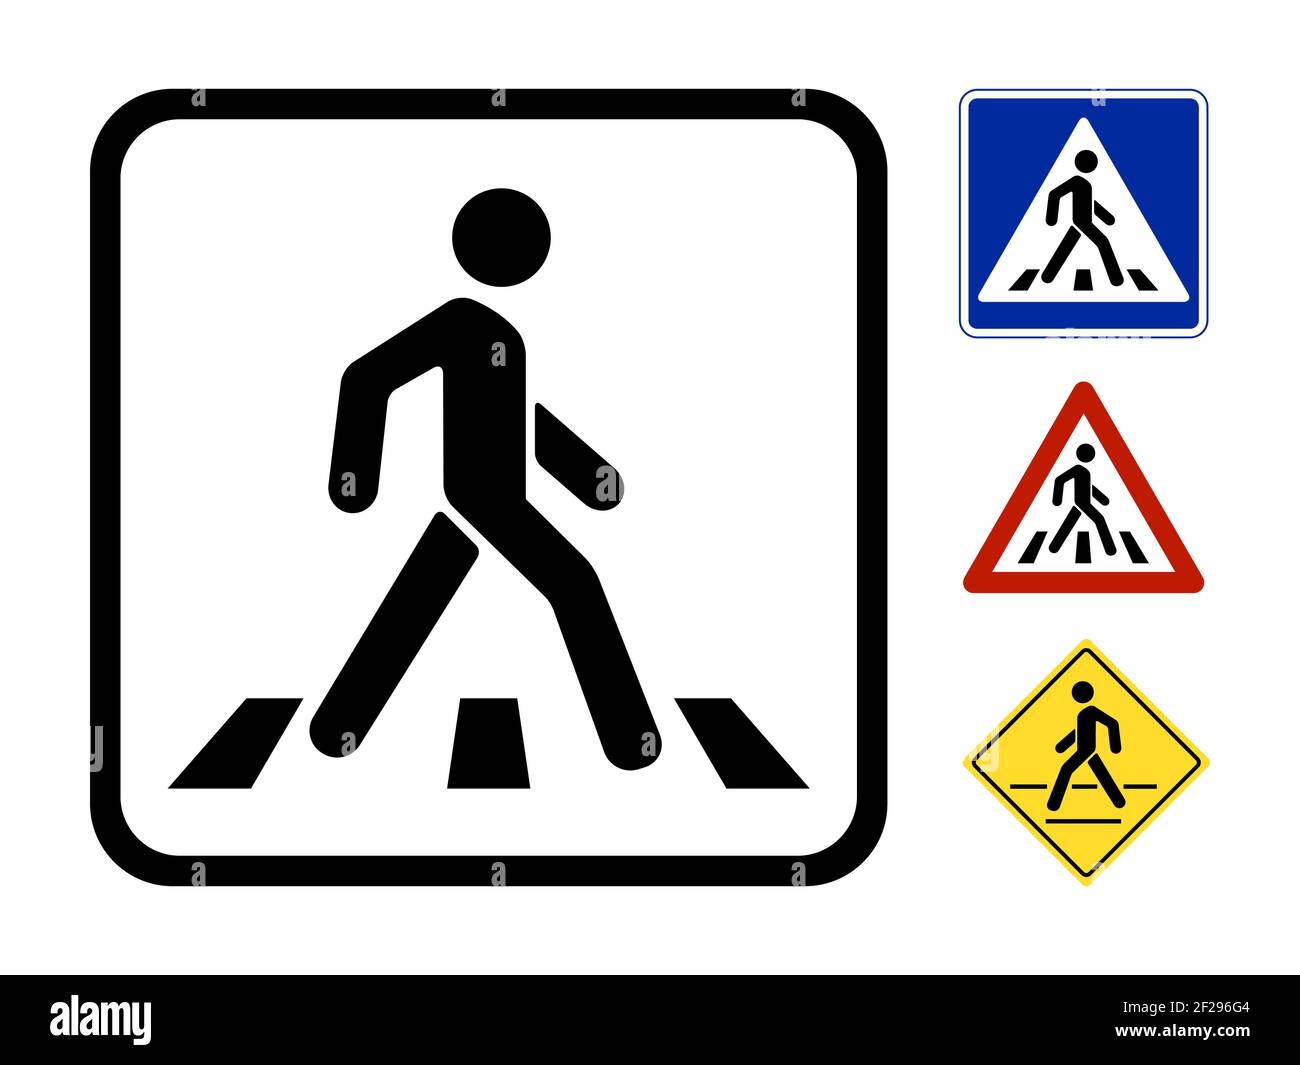 Pedestrian symbol vector illustration isolated on white background Stock Vector